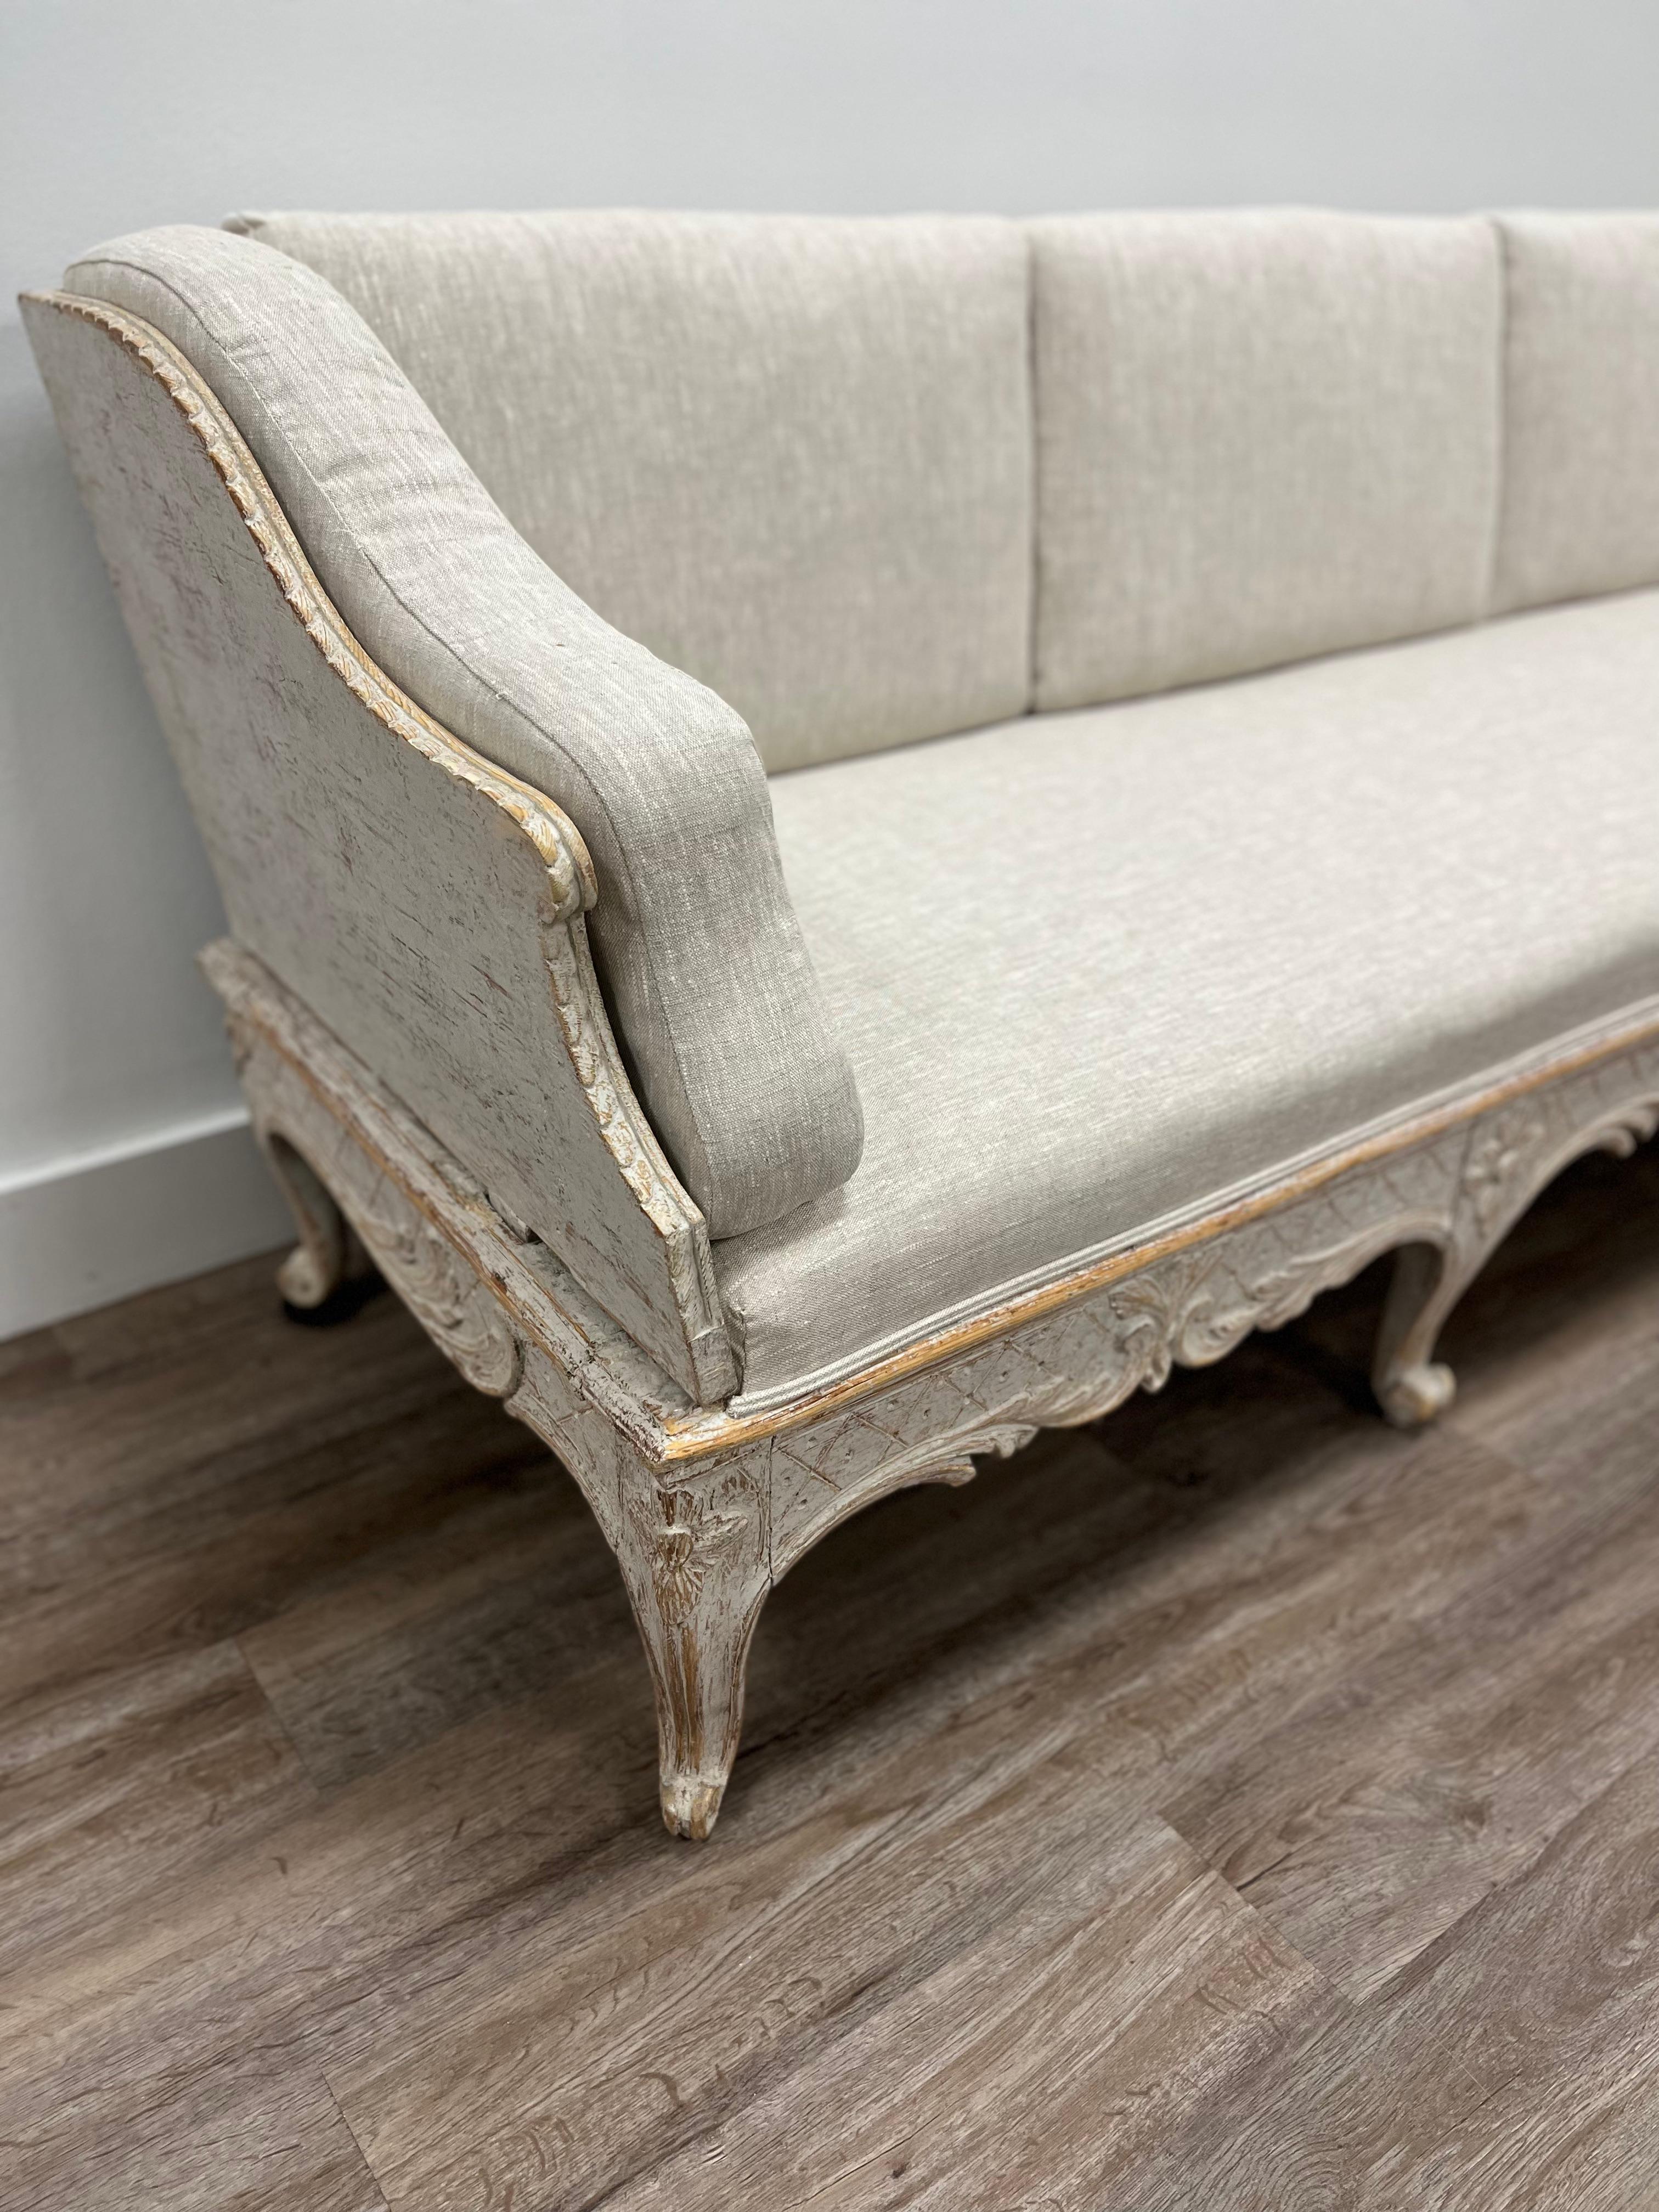 An exquisite Swedish tragsofa with traditional Rococo shape and design (e.g. cabriole legs, curves and counter-curves) and Gustavian carvings (e.g. cross hatching, floral detail above the legs). A unique transitional piece made in Stockholm.